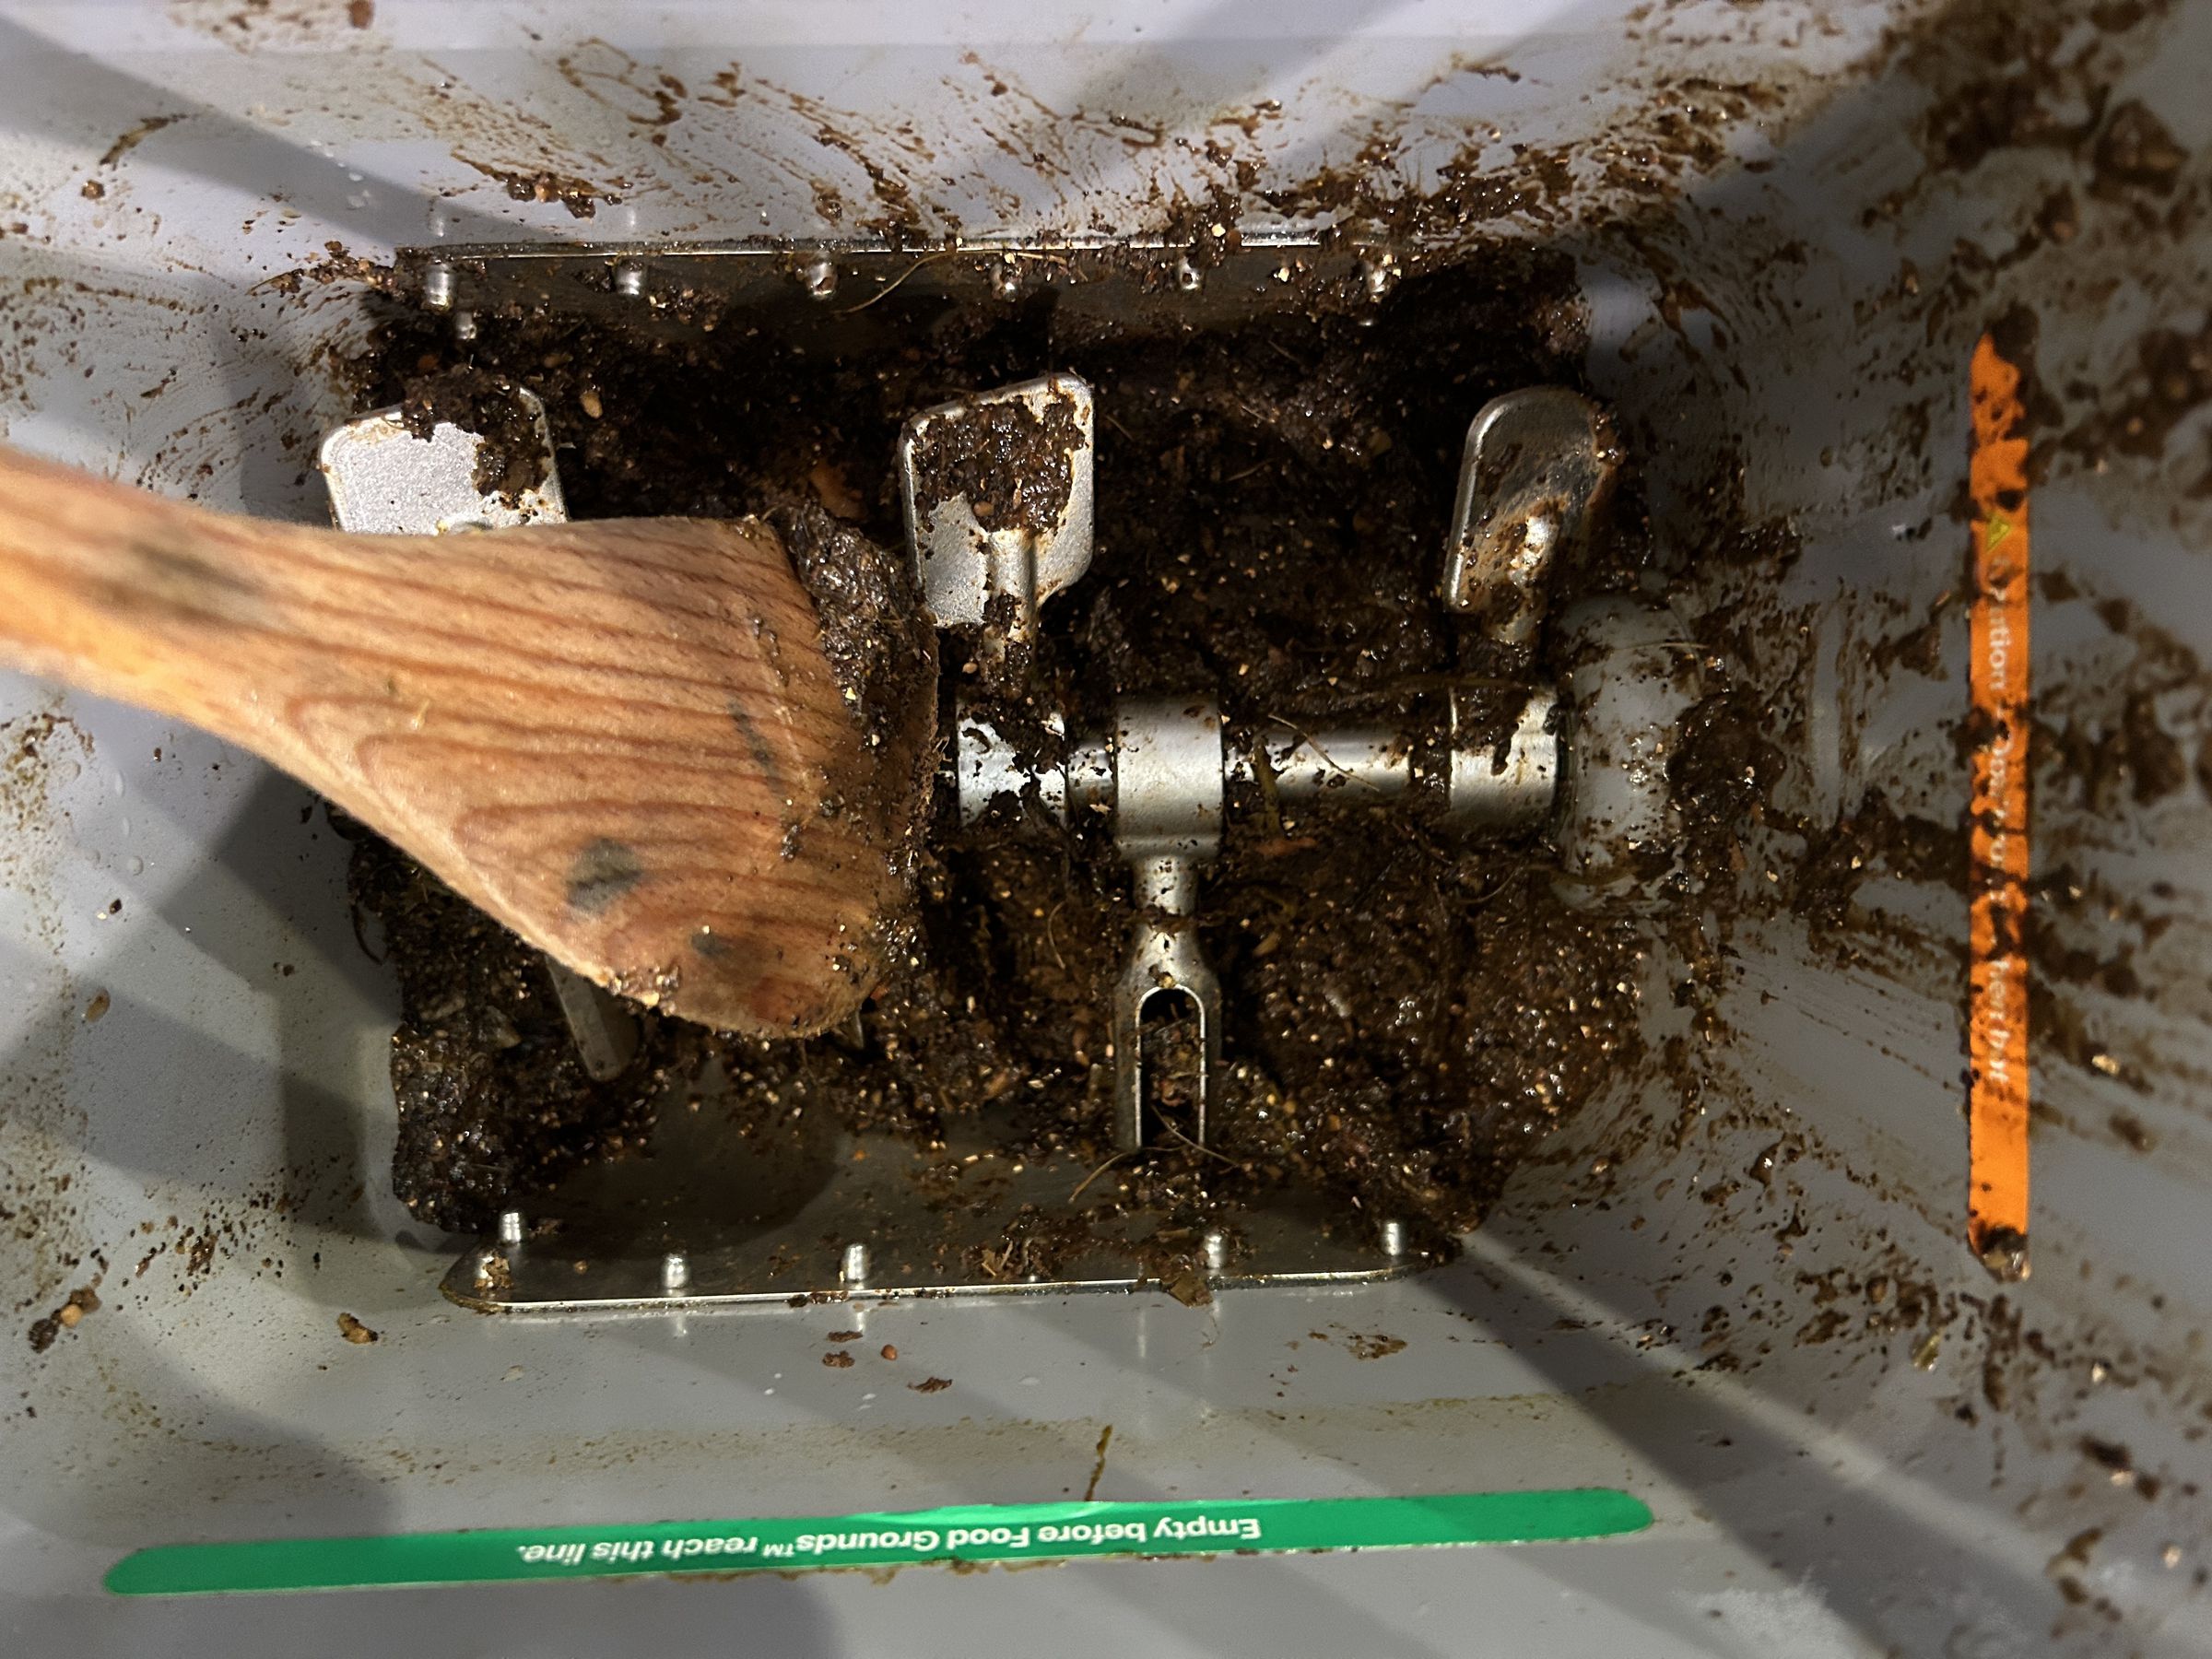 The food grounds generally resemble dirt, but when the bin got jammed, Mill told me to soak them to try and clear it out. The resulting sludge was so immovable I had to send the bucket back to Mill to deal with.